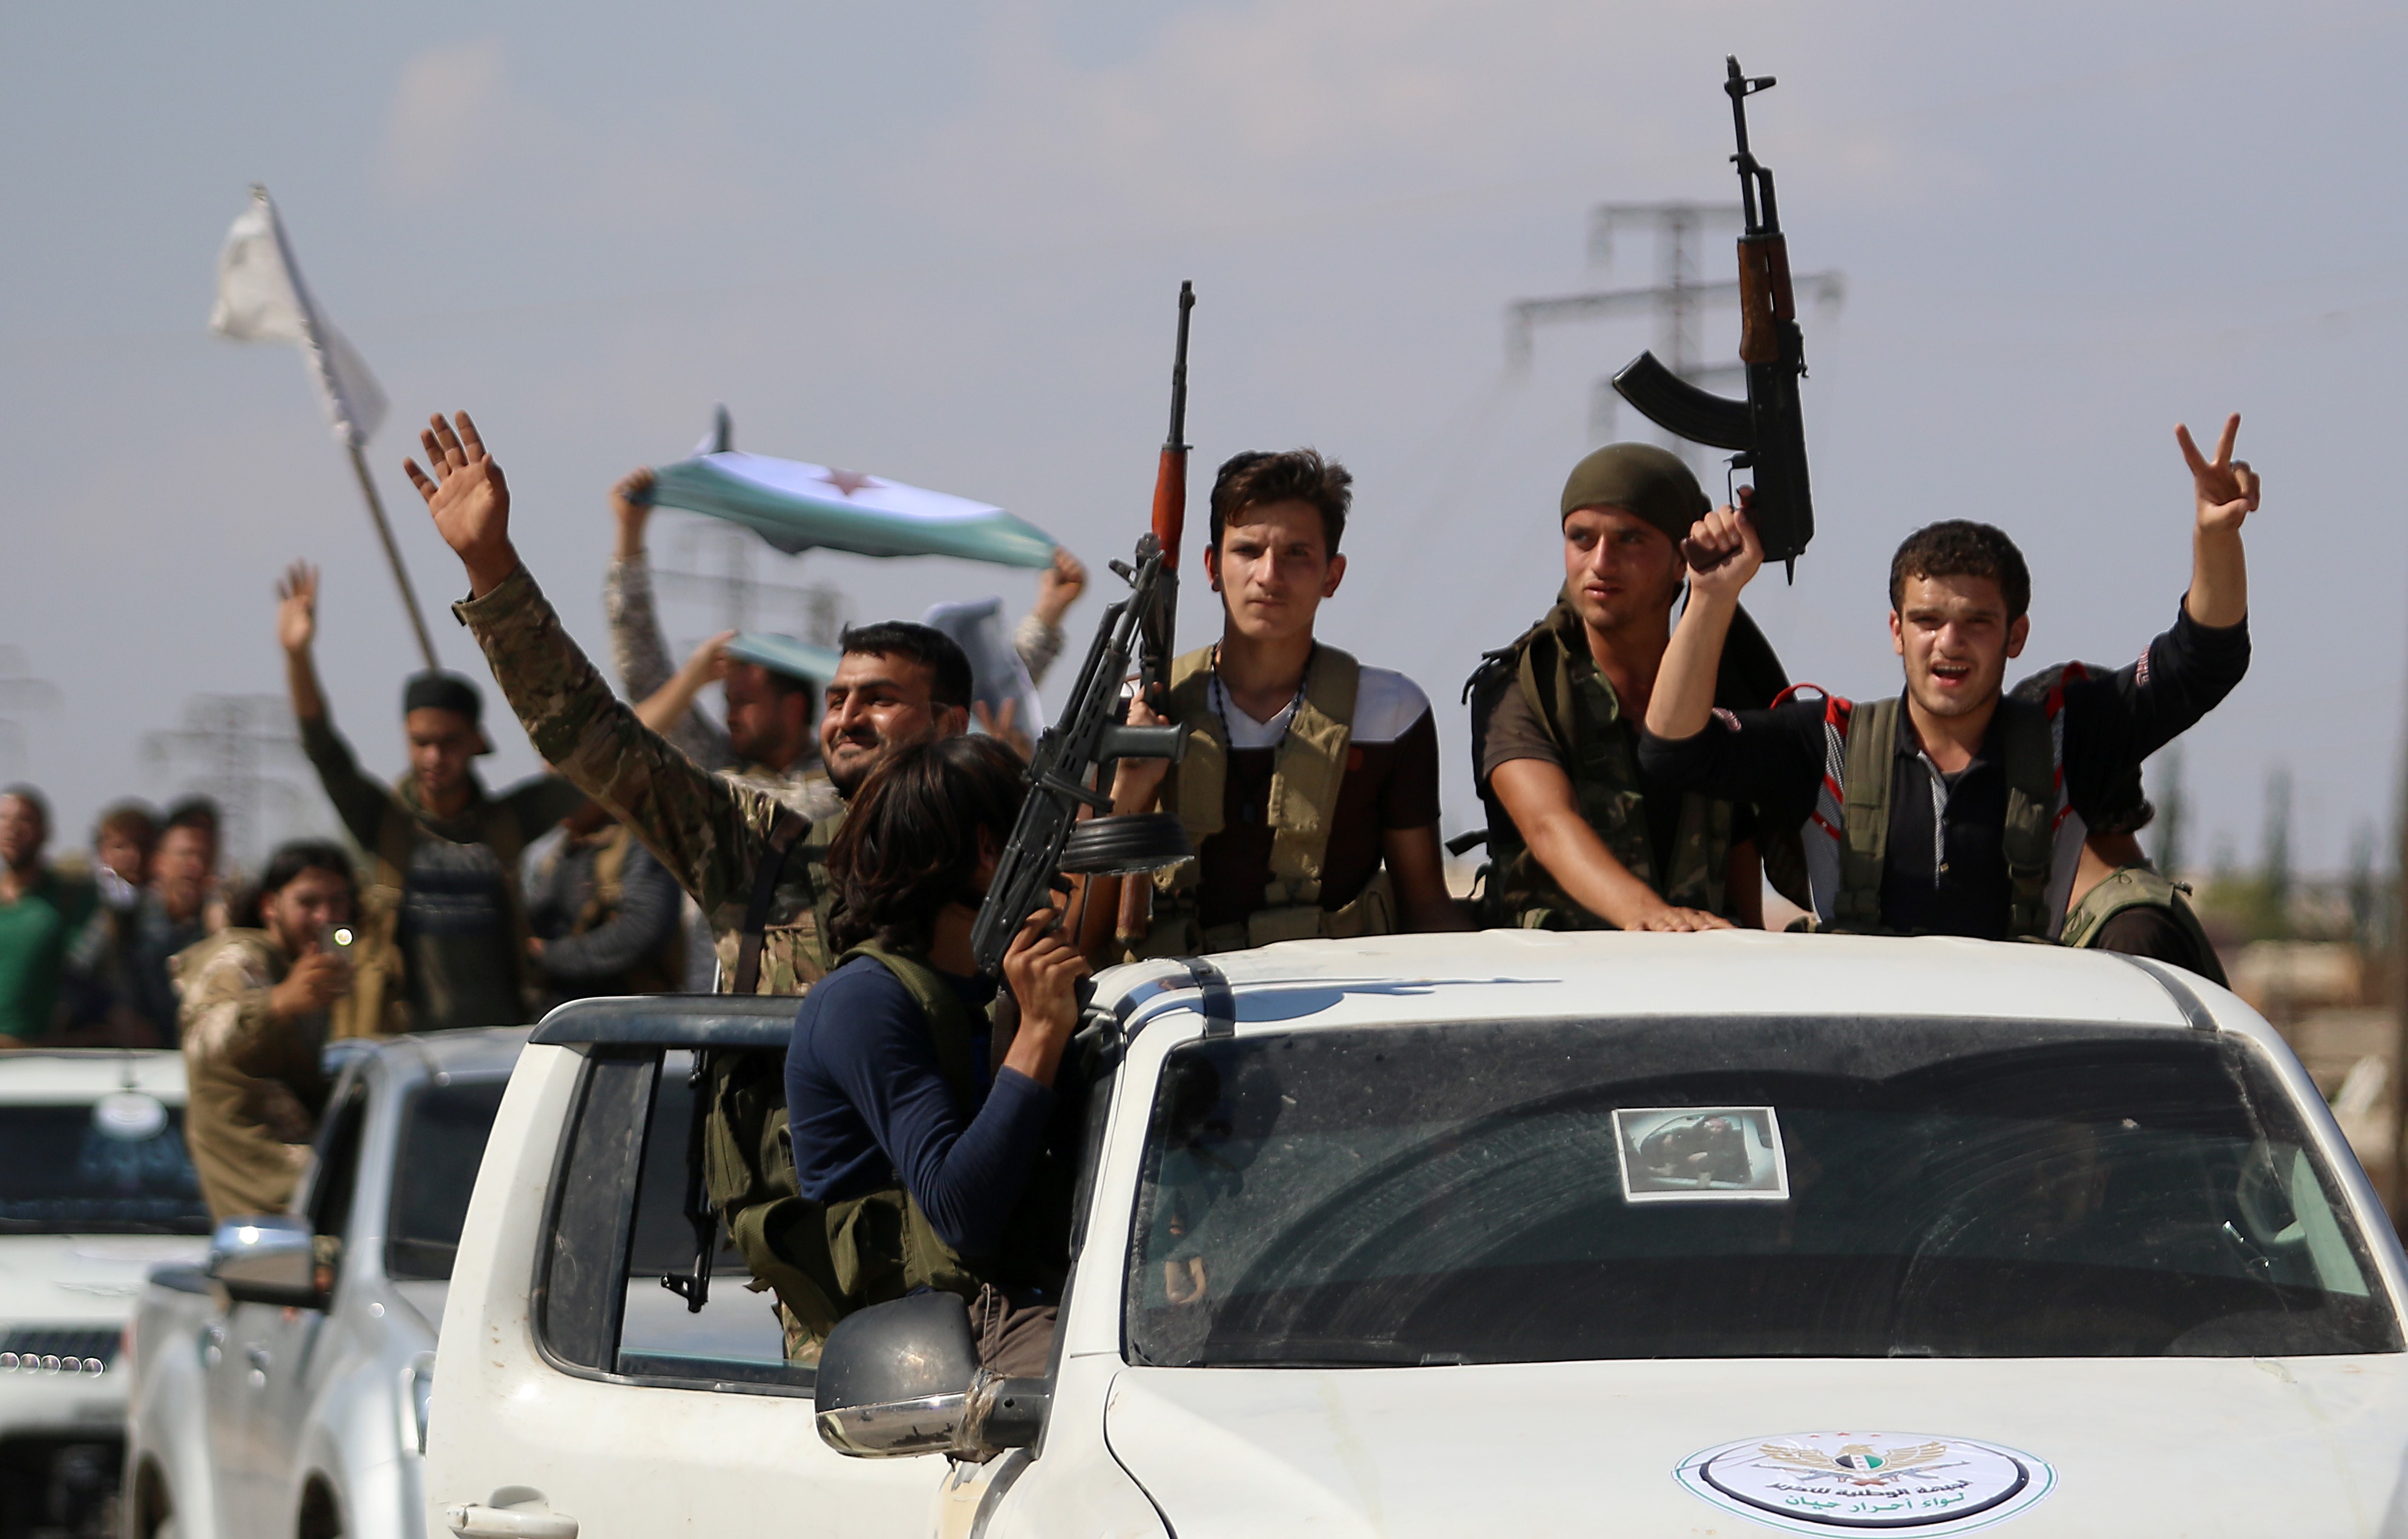  Syrian rebel fighters from the recently-formed "National Liberation Front" parade following military training in Idlib province on 11 September, 2018 (AFP)